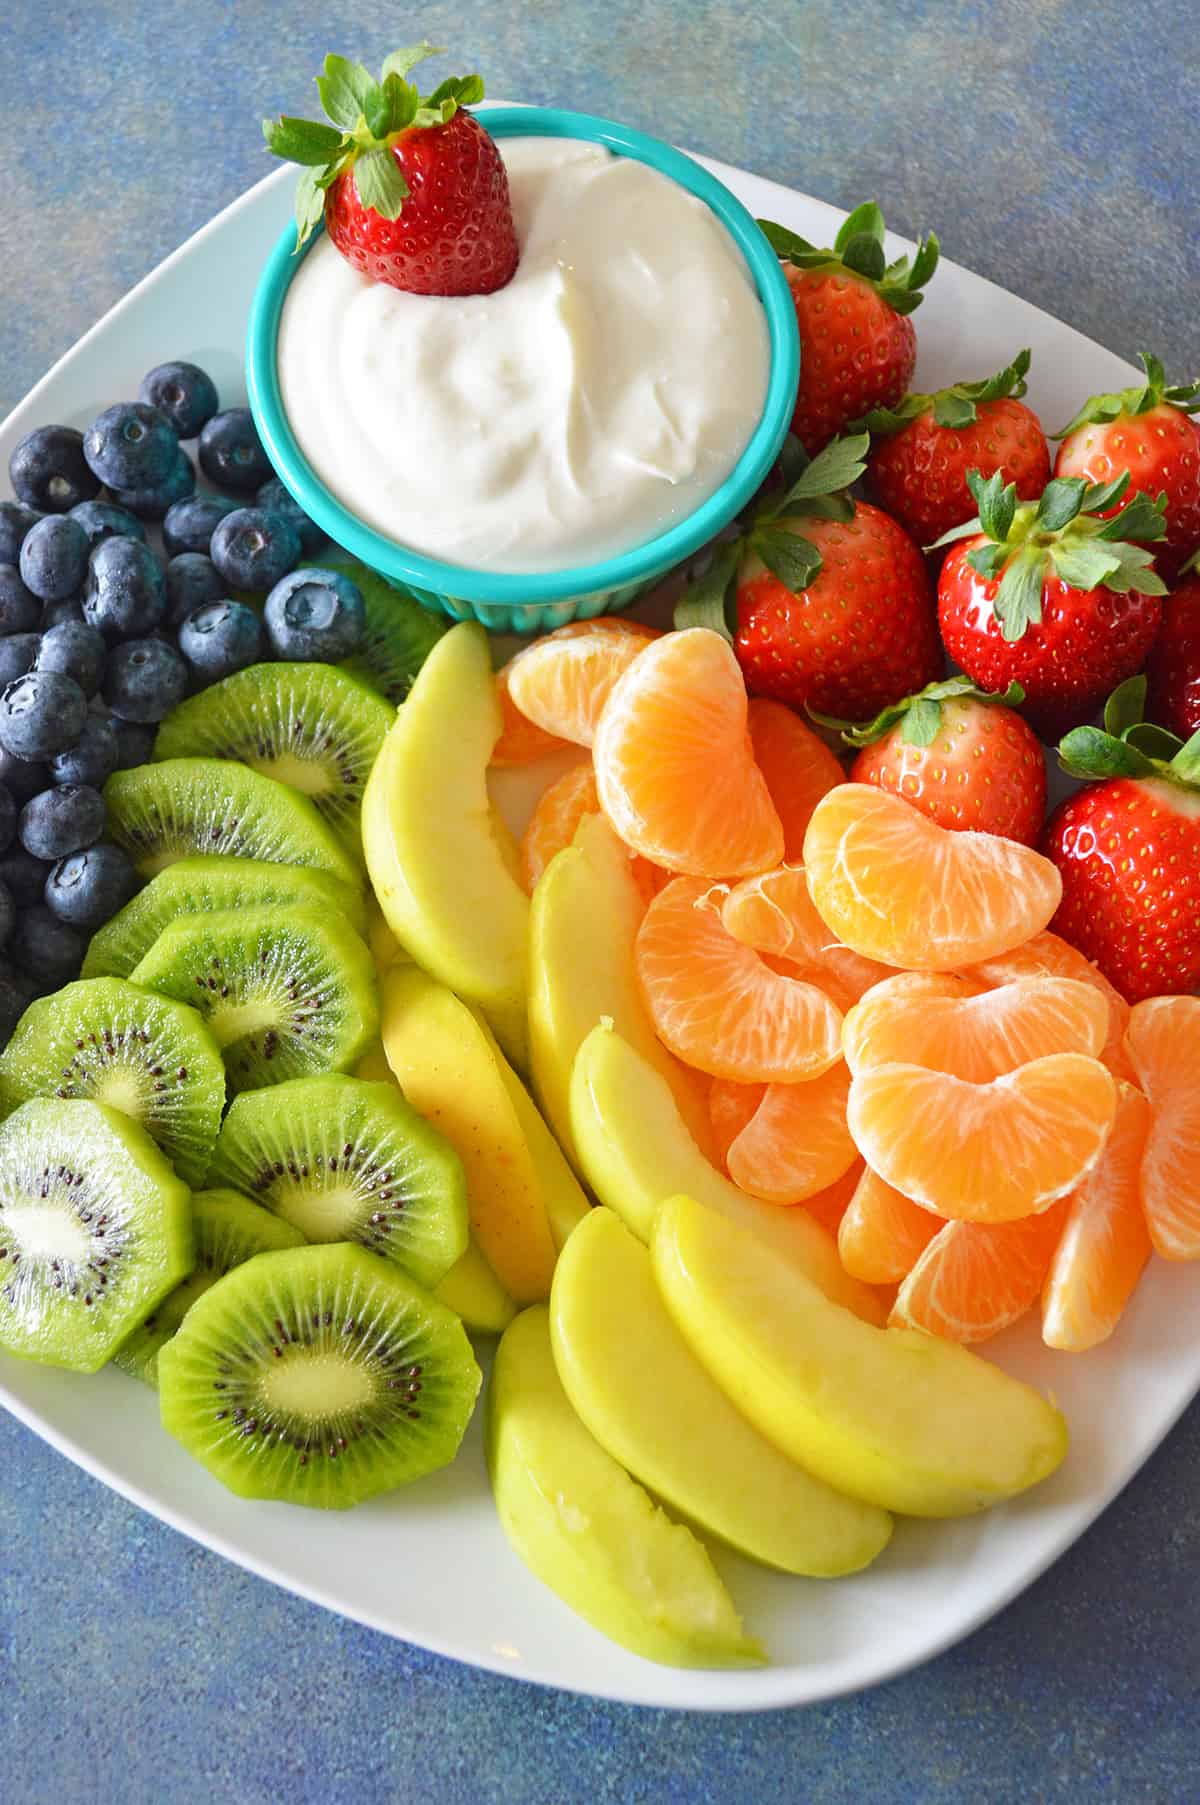 Cream cheese fruit dip in bowl plated with blueberries, kiwi, yellow apples, mandarins and strawberries.